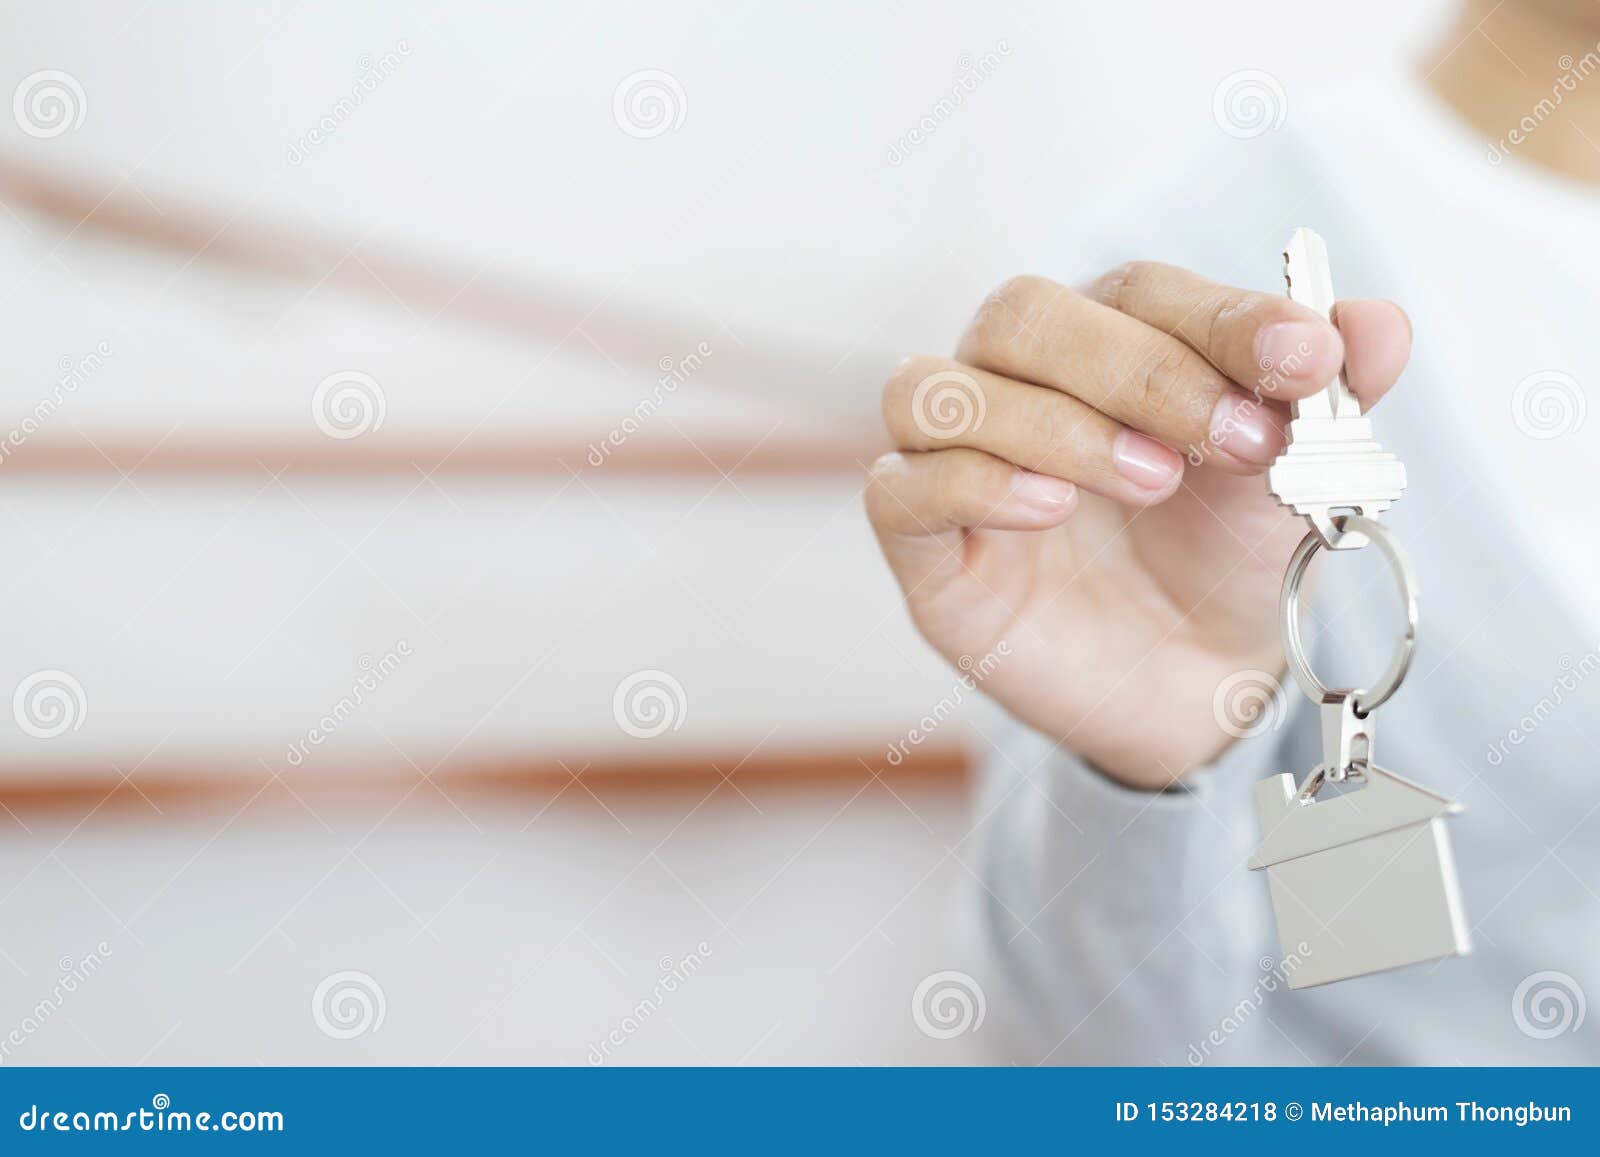 female hand holding house key on home d key chain. concept for buying real estate agent